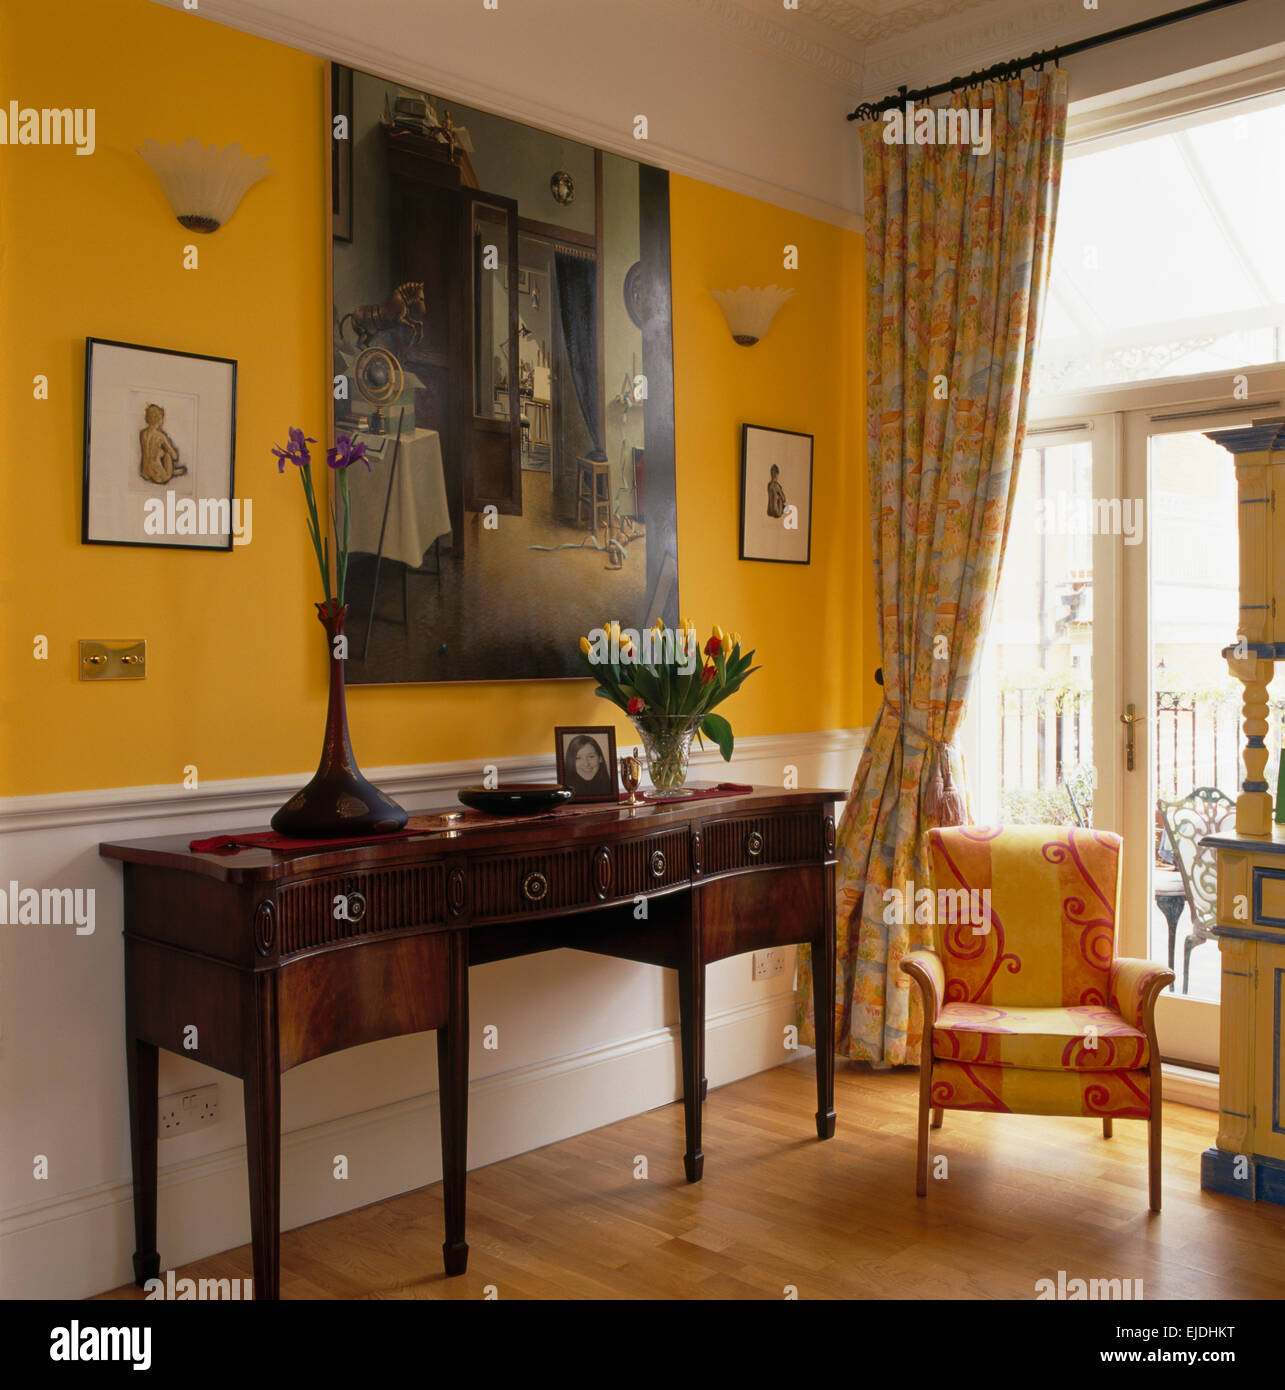 Large painting above antique console table in bright yellow hall with yellow+pink upholstered chair and wooden flooring Stock Photo